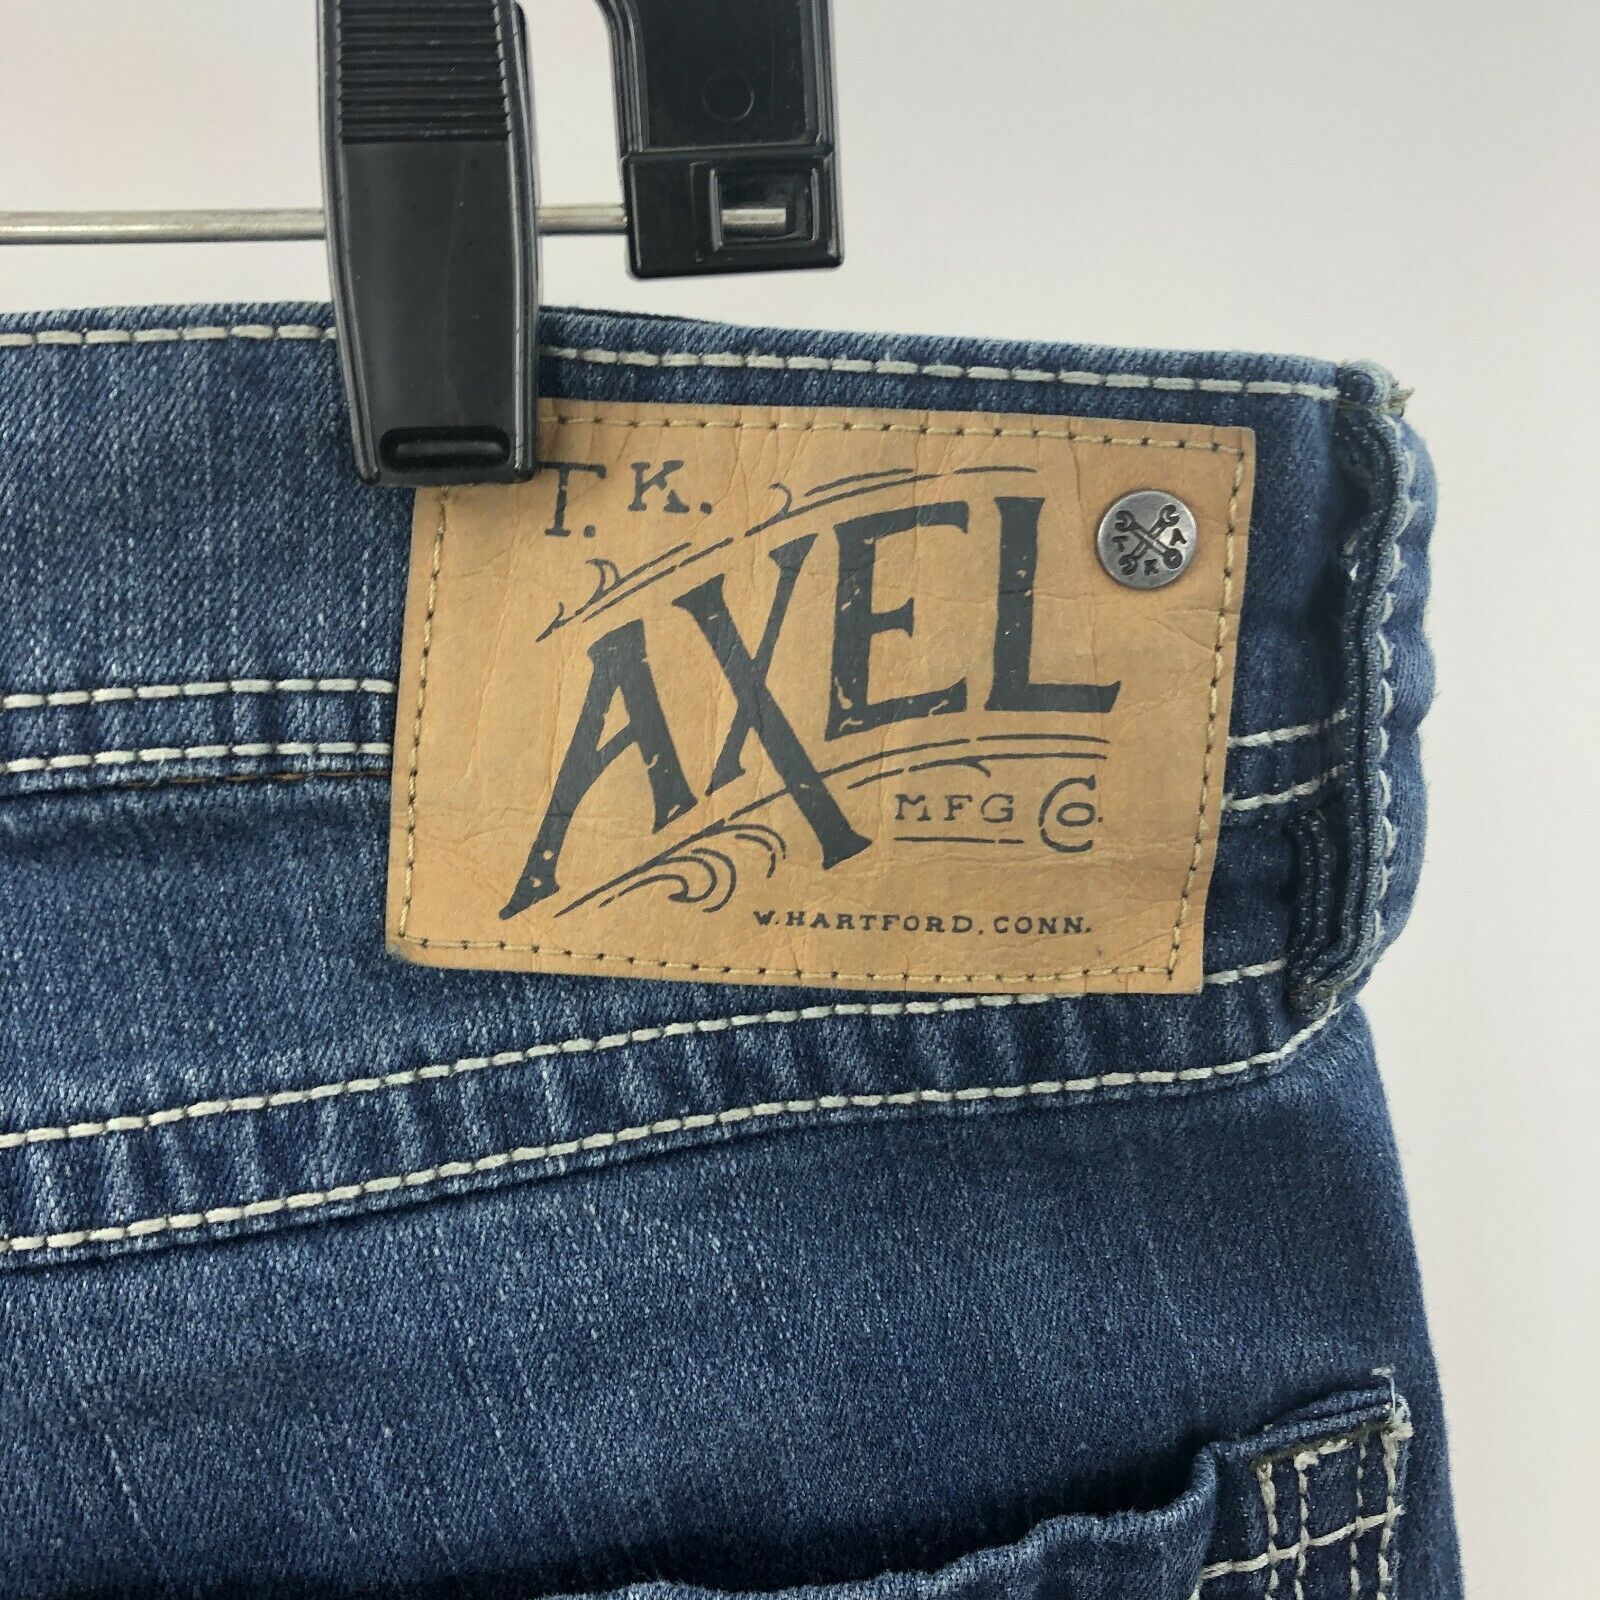 TK Axel Mens Jeans 34X32 Athletic Fit Dark Wash A5-05 - Jeans